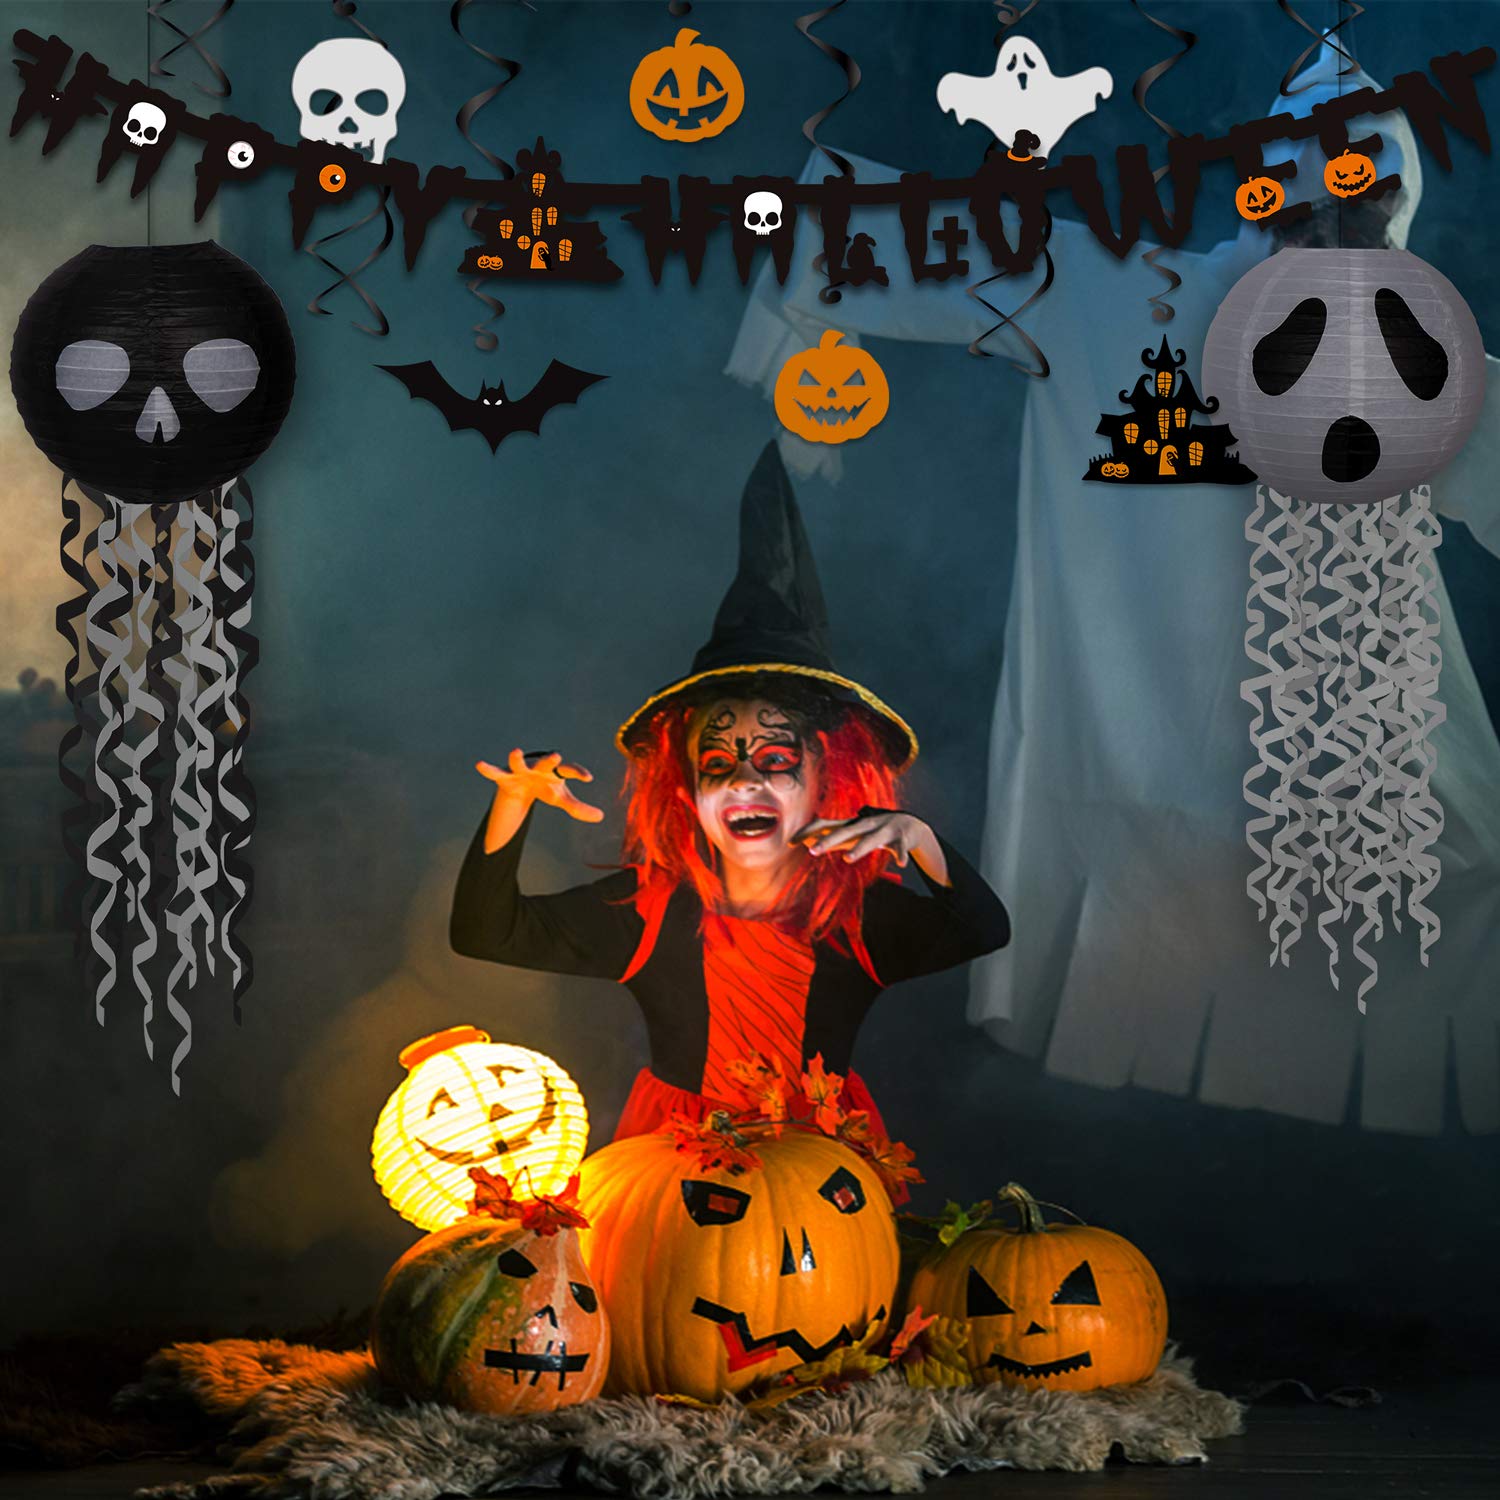 Decorlife Halloween Party Decorations, Halloween Decorations Indoor Including Happy Halloween Banner, Wire Lanterns, Hanging Swirls, Castle and Bats Centerpiece, Spiders and Web, Balloons